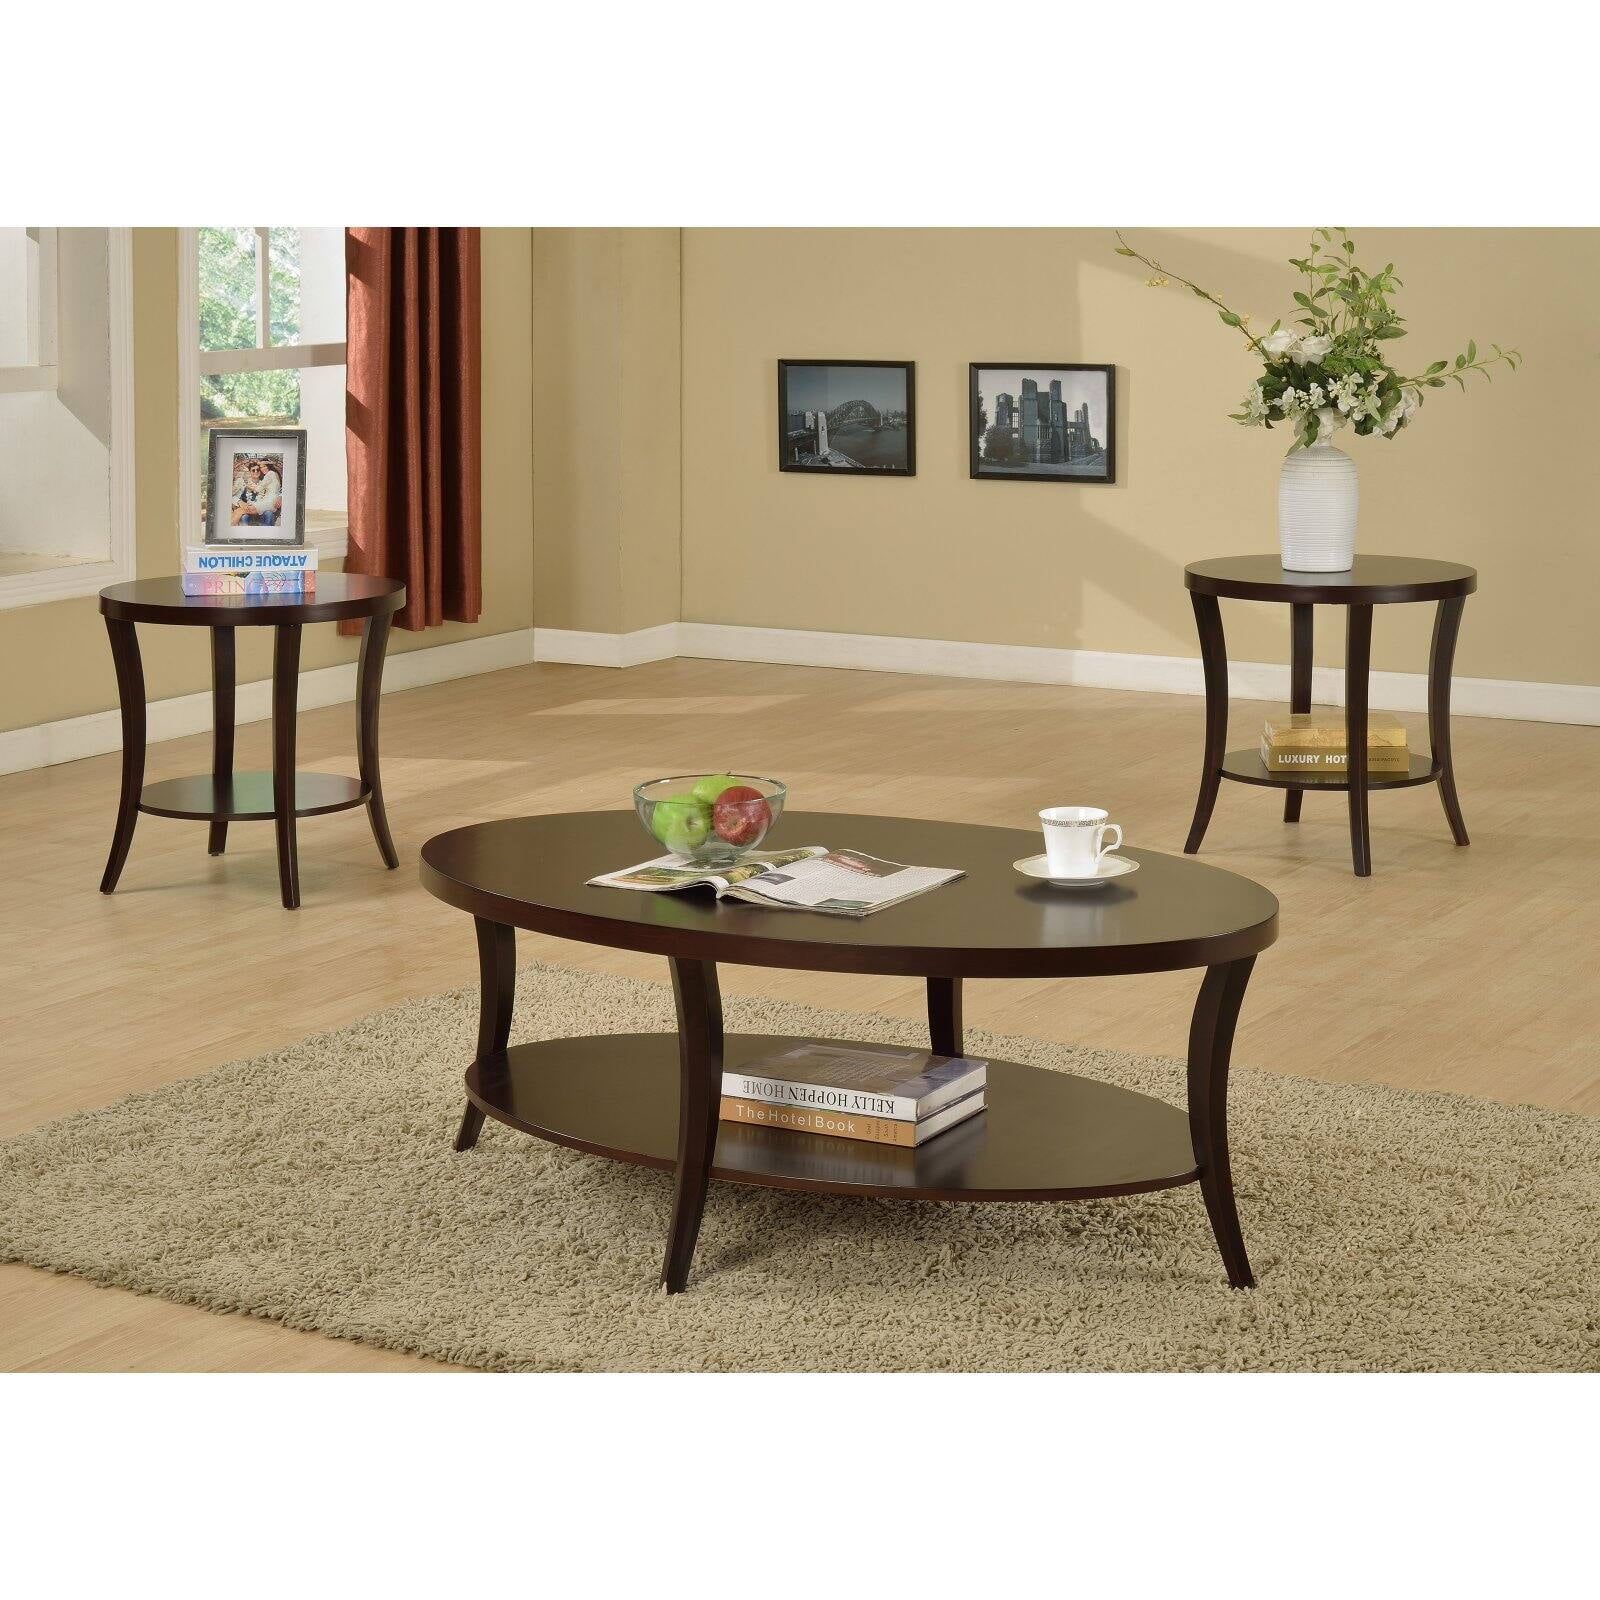 30+ 3 Piece Nesting Coffee Table Set Coffee Table With Ottoman Intended For Coffee Tables Of 3 Nesting Tables (View 19 of 20)